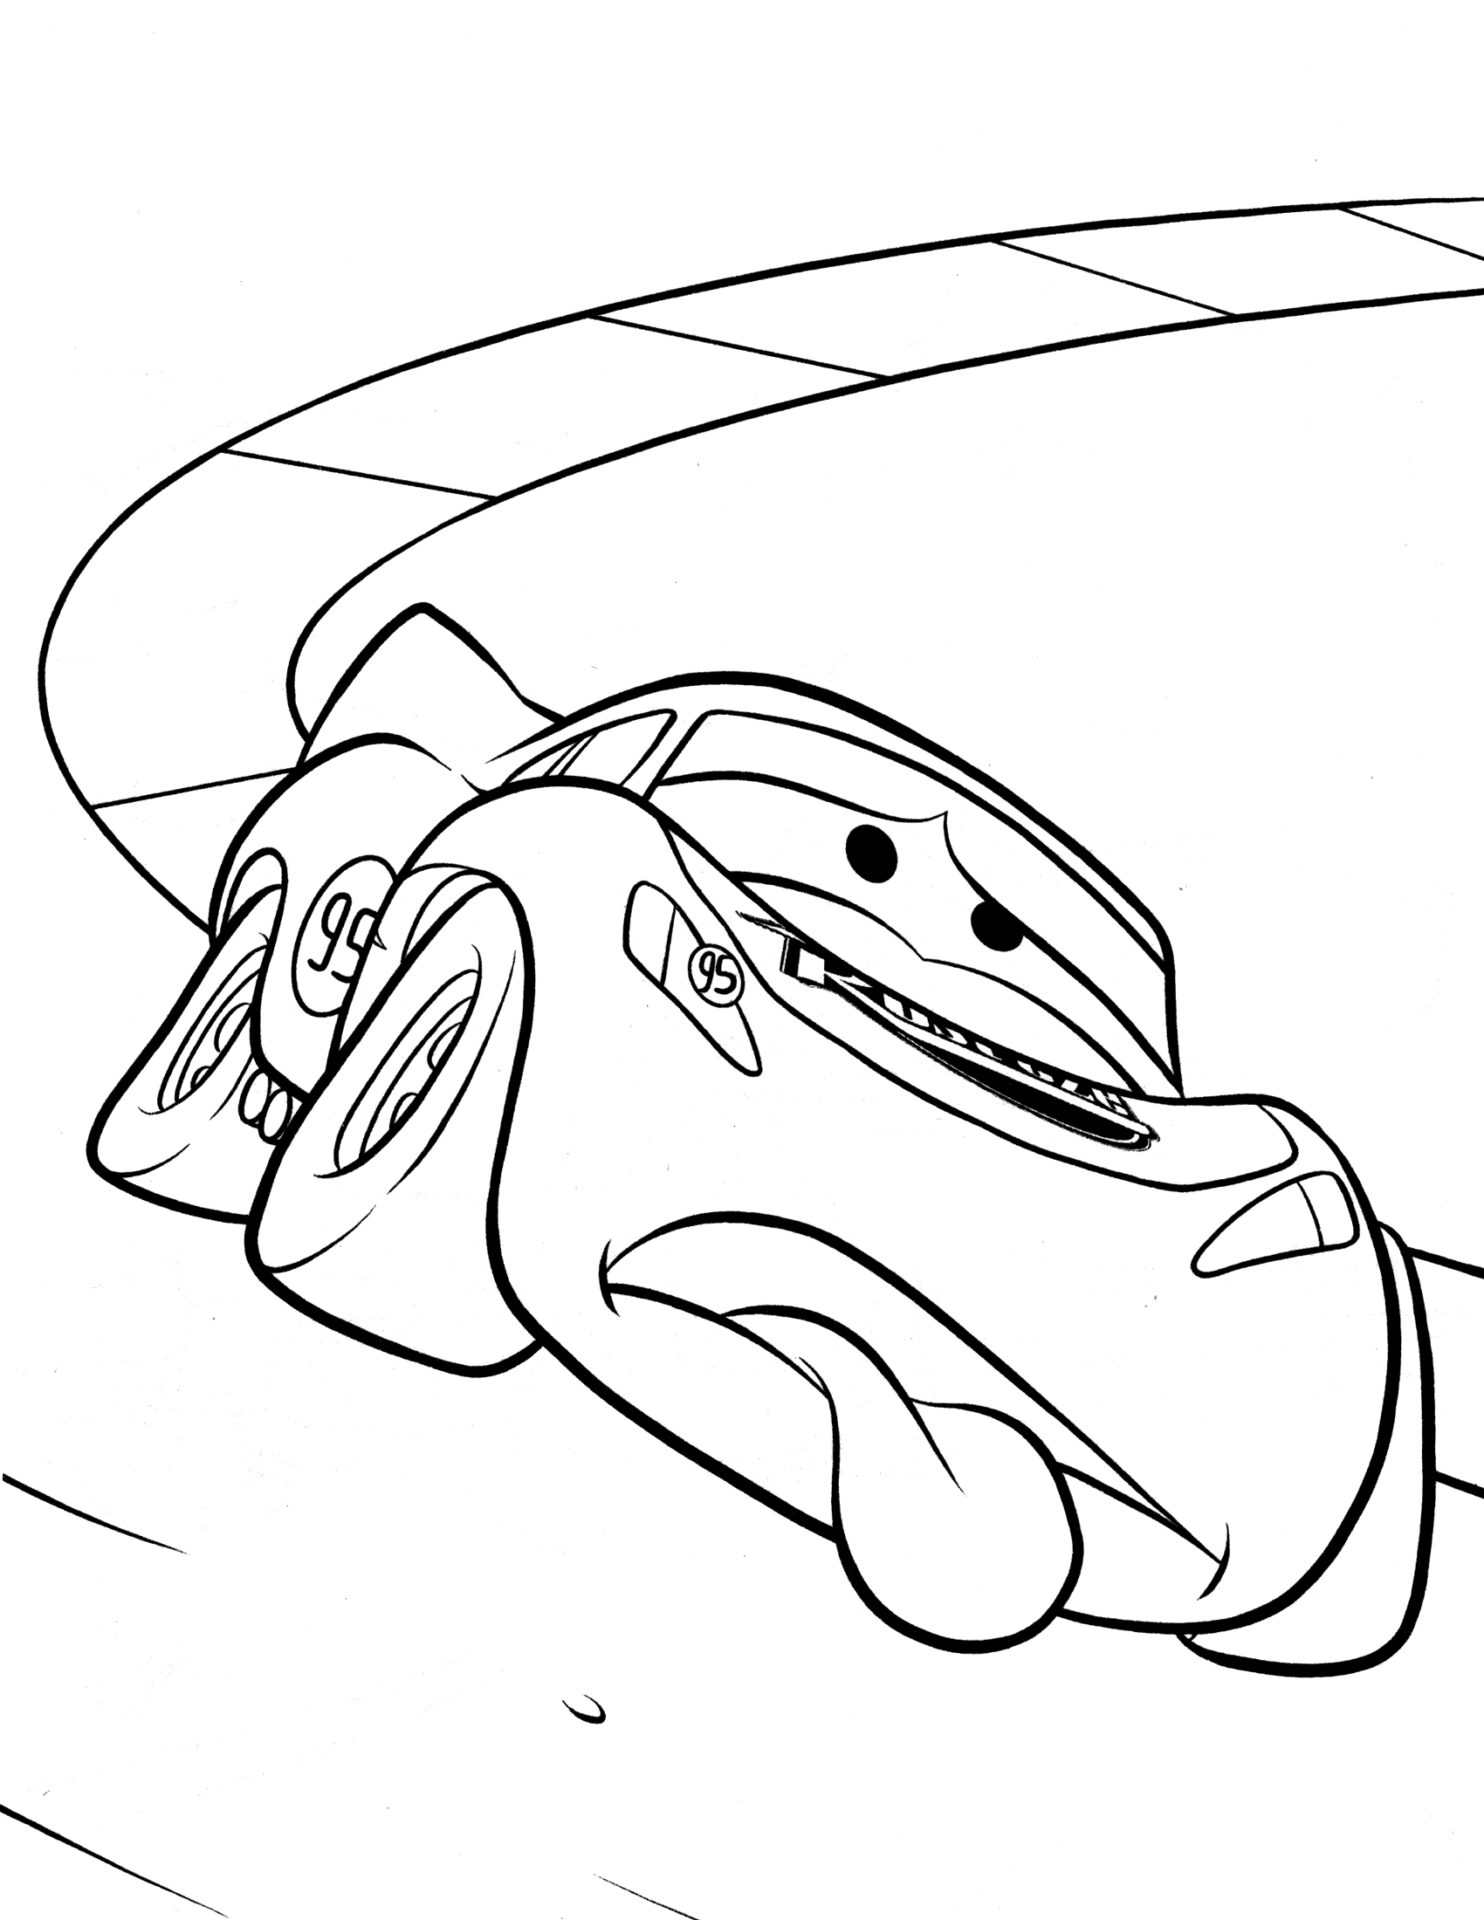 McQueen Is Tired Coloring Page   Free Printable Coloring Pages for ...